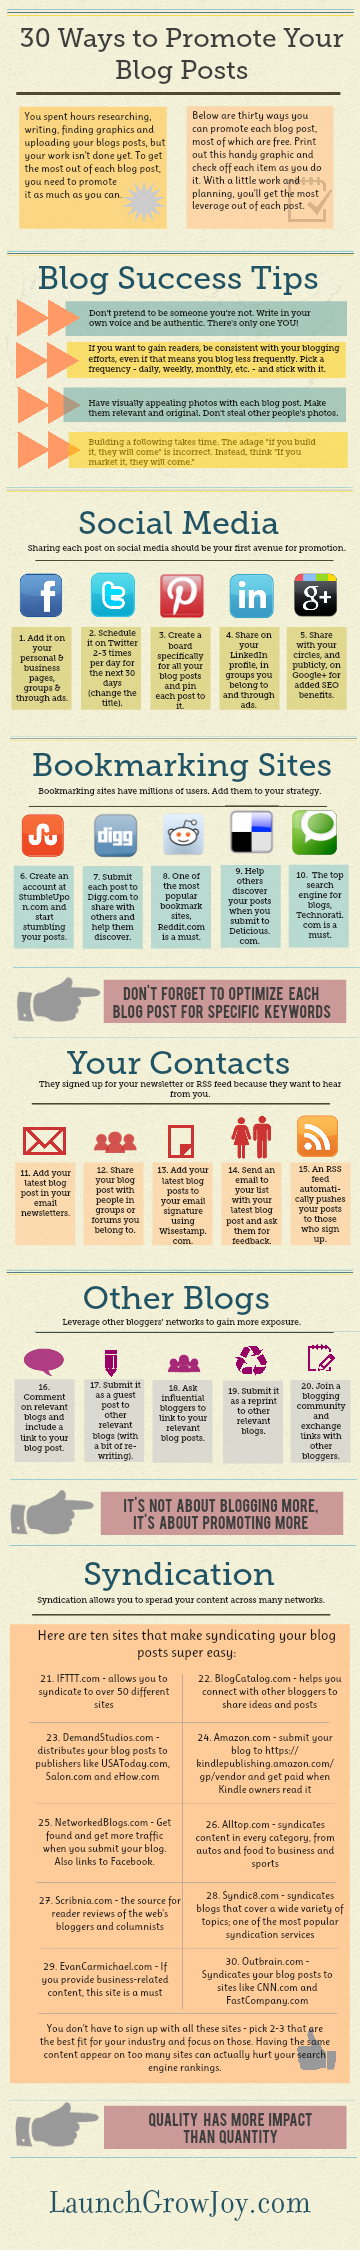 30-ways-to-promote-your-blog-posts.png